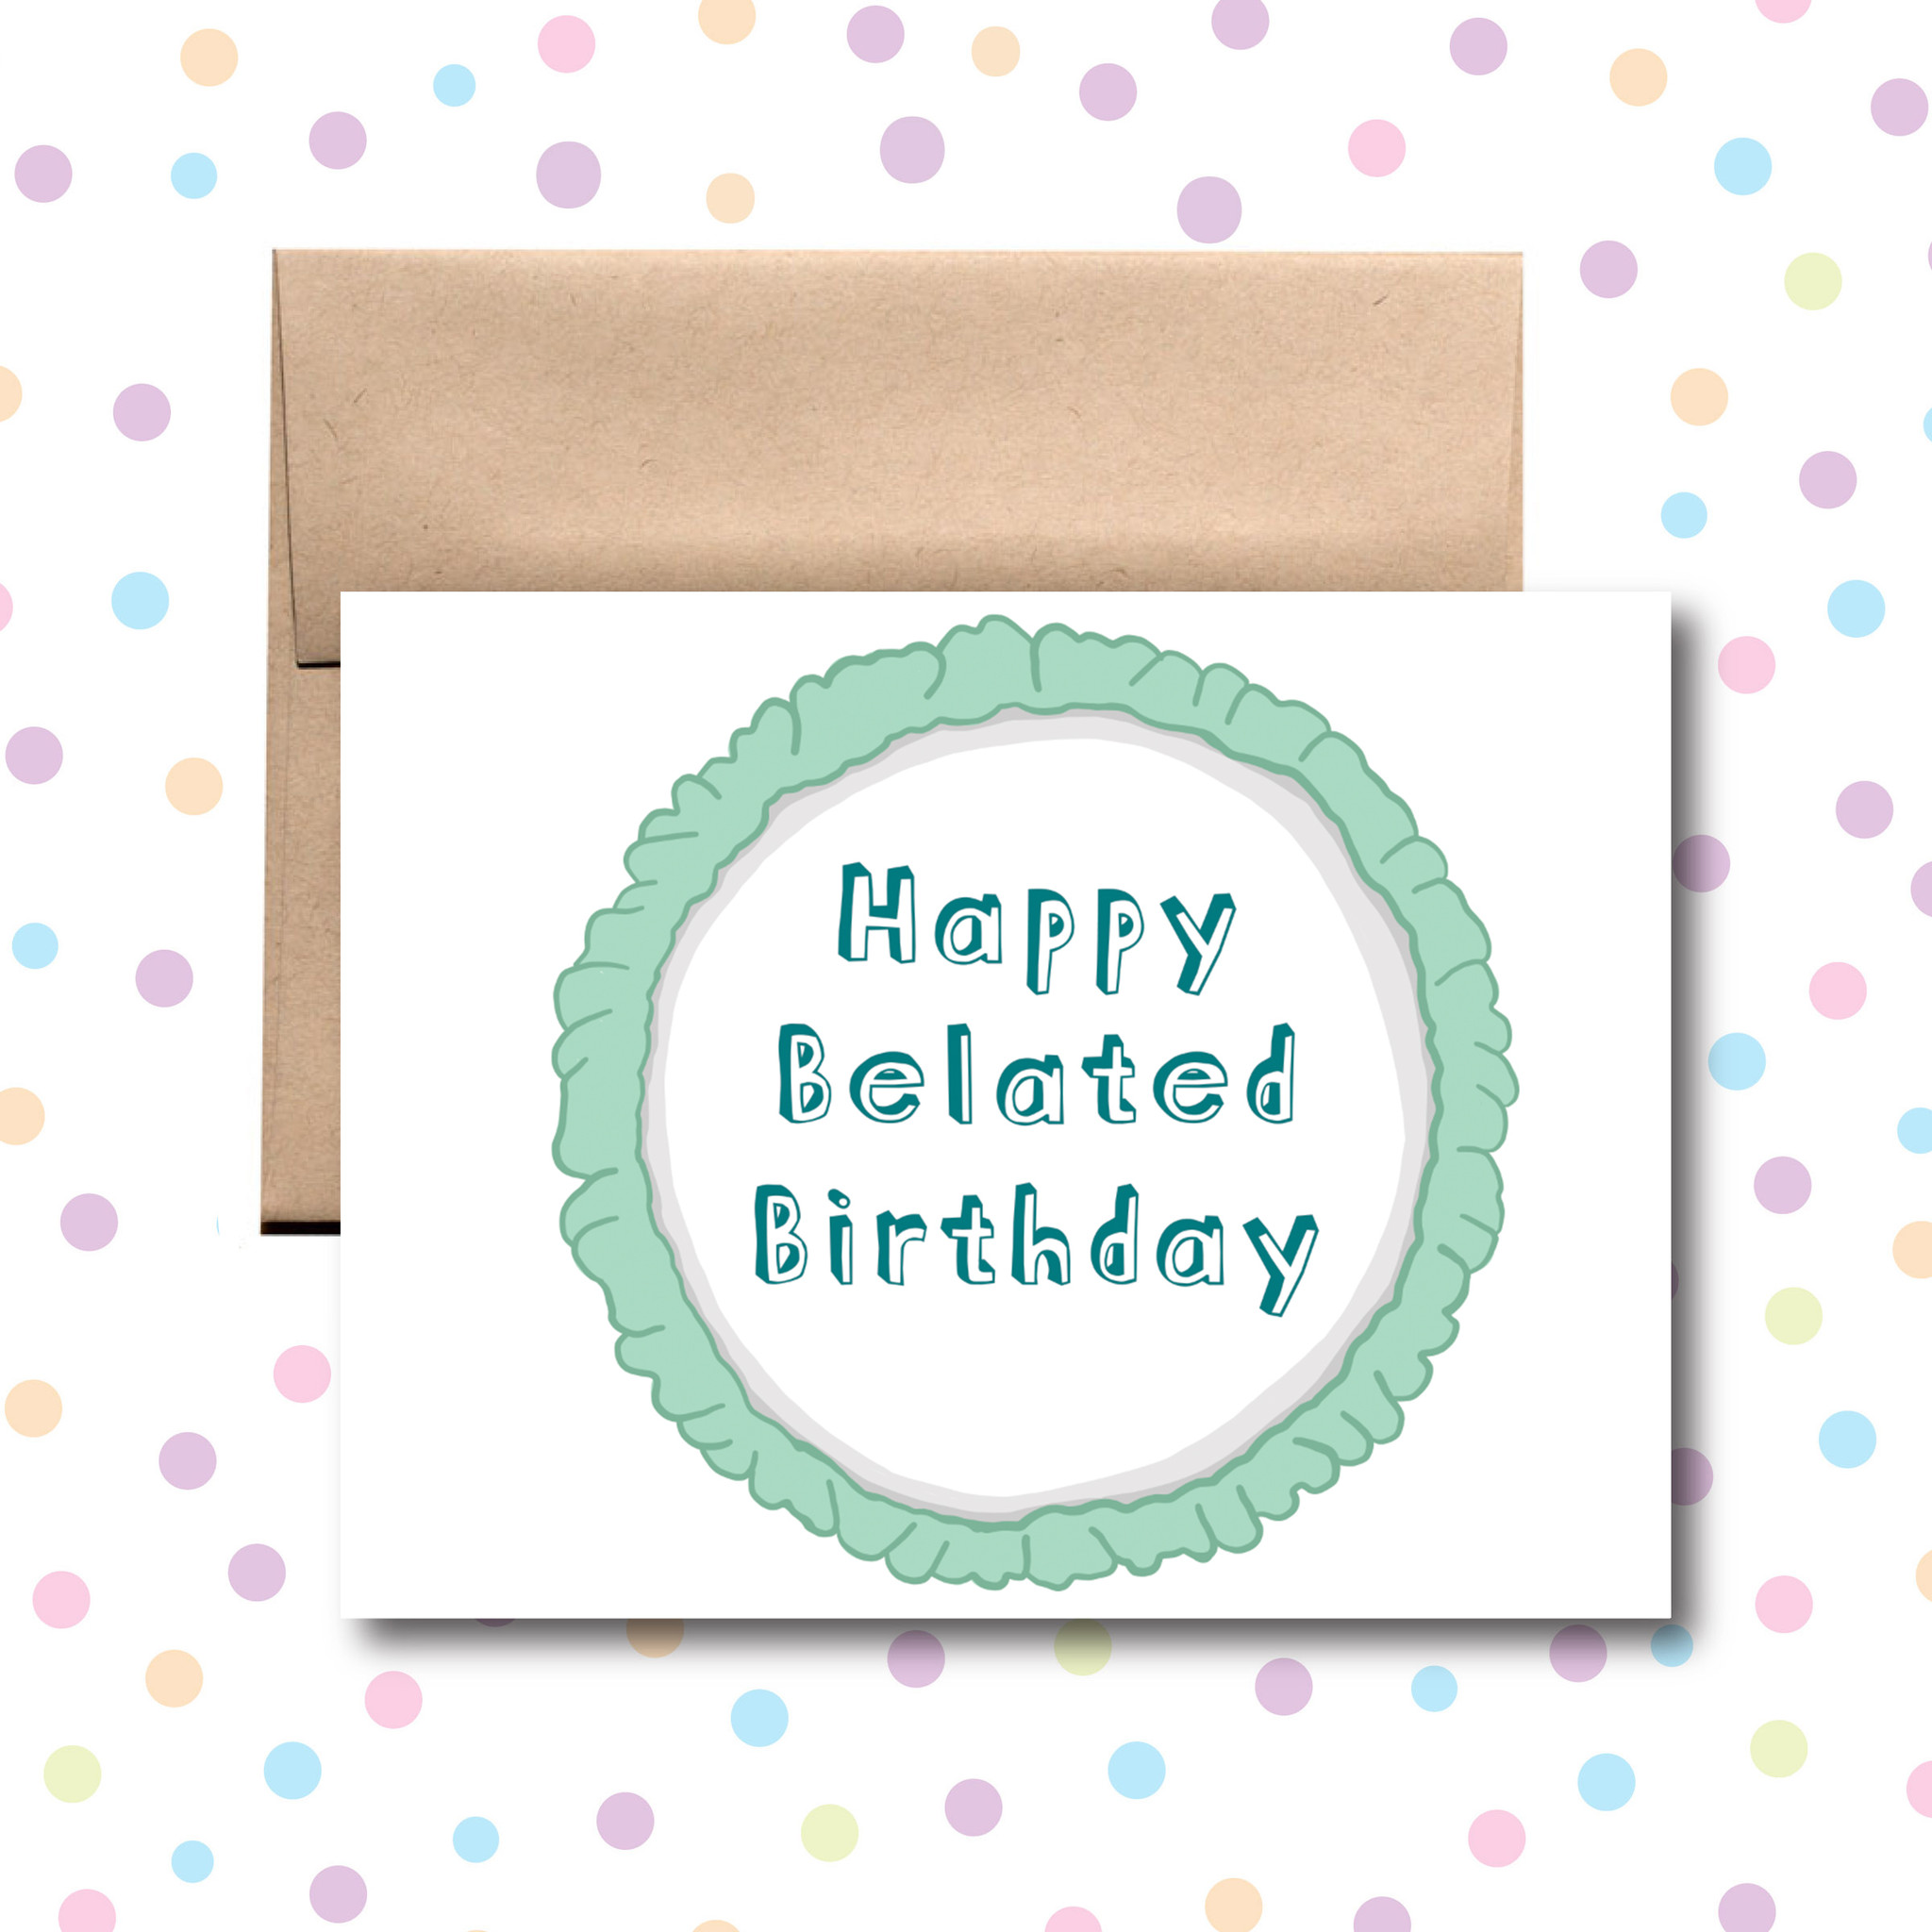 Happy Belated Birthday - Little Dog Paper Company